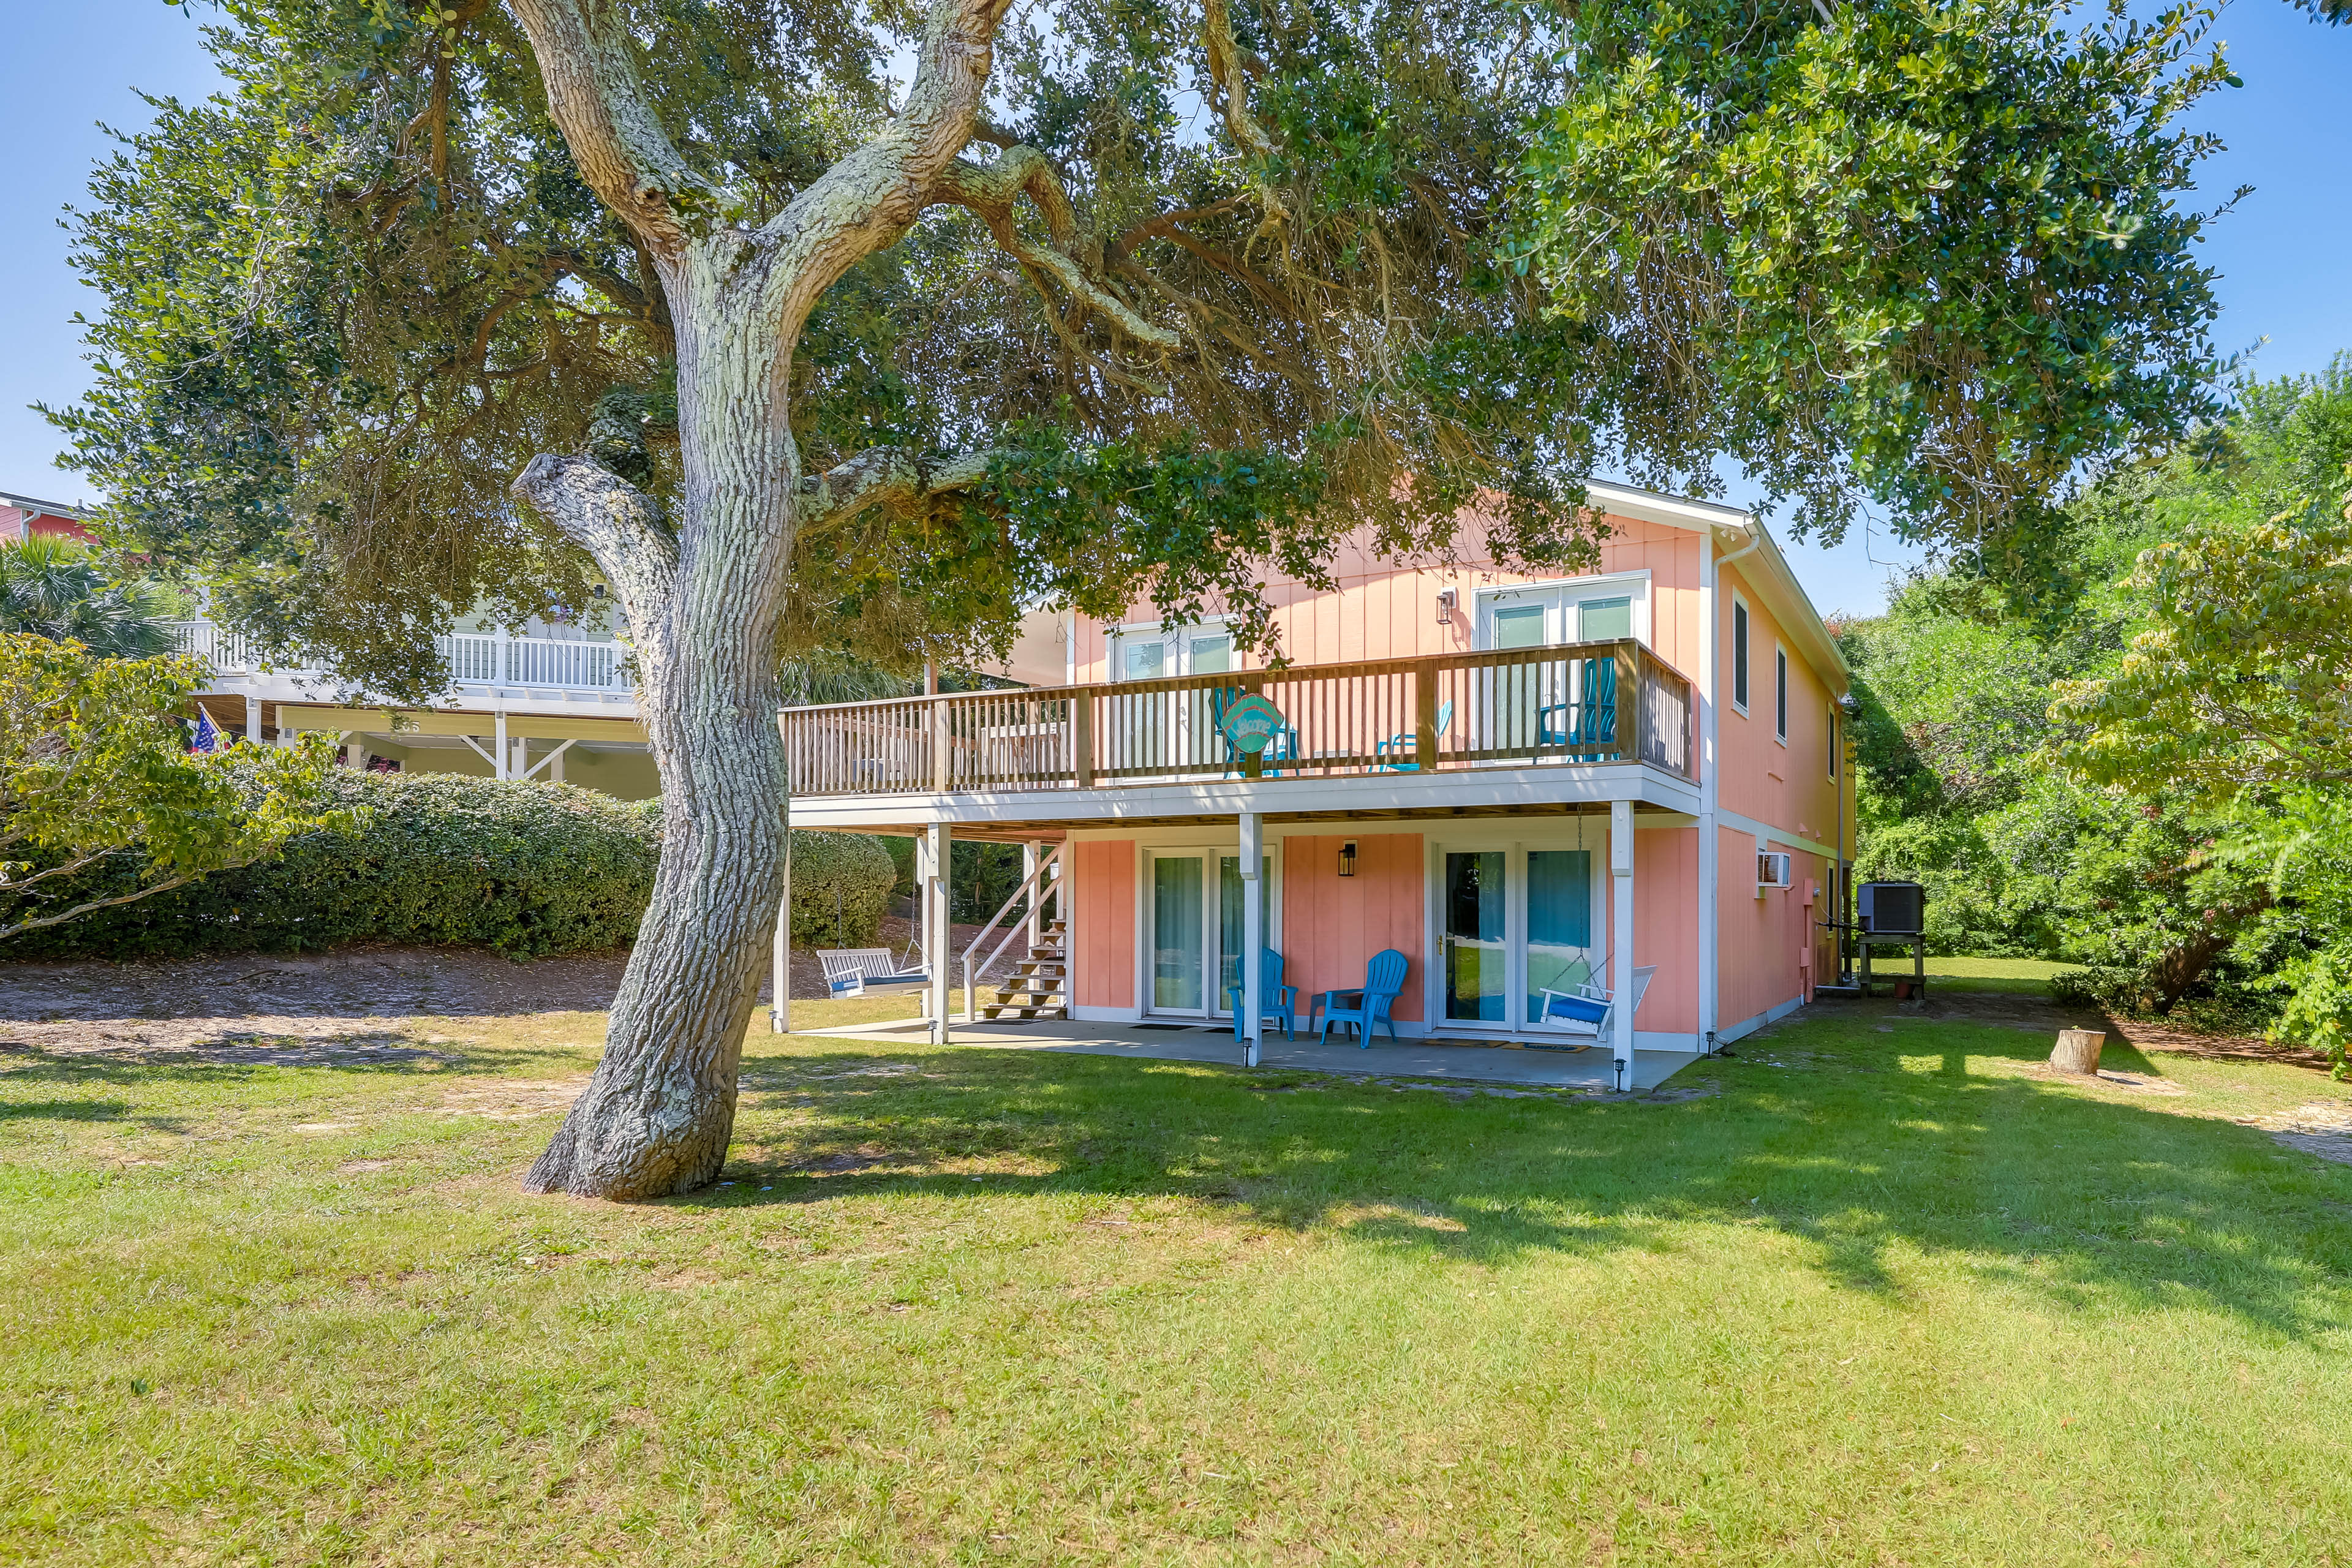 Emerald Isle Vacation Rental | 2BR | 1BA | Half Step Required | 850 Sq Ft